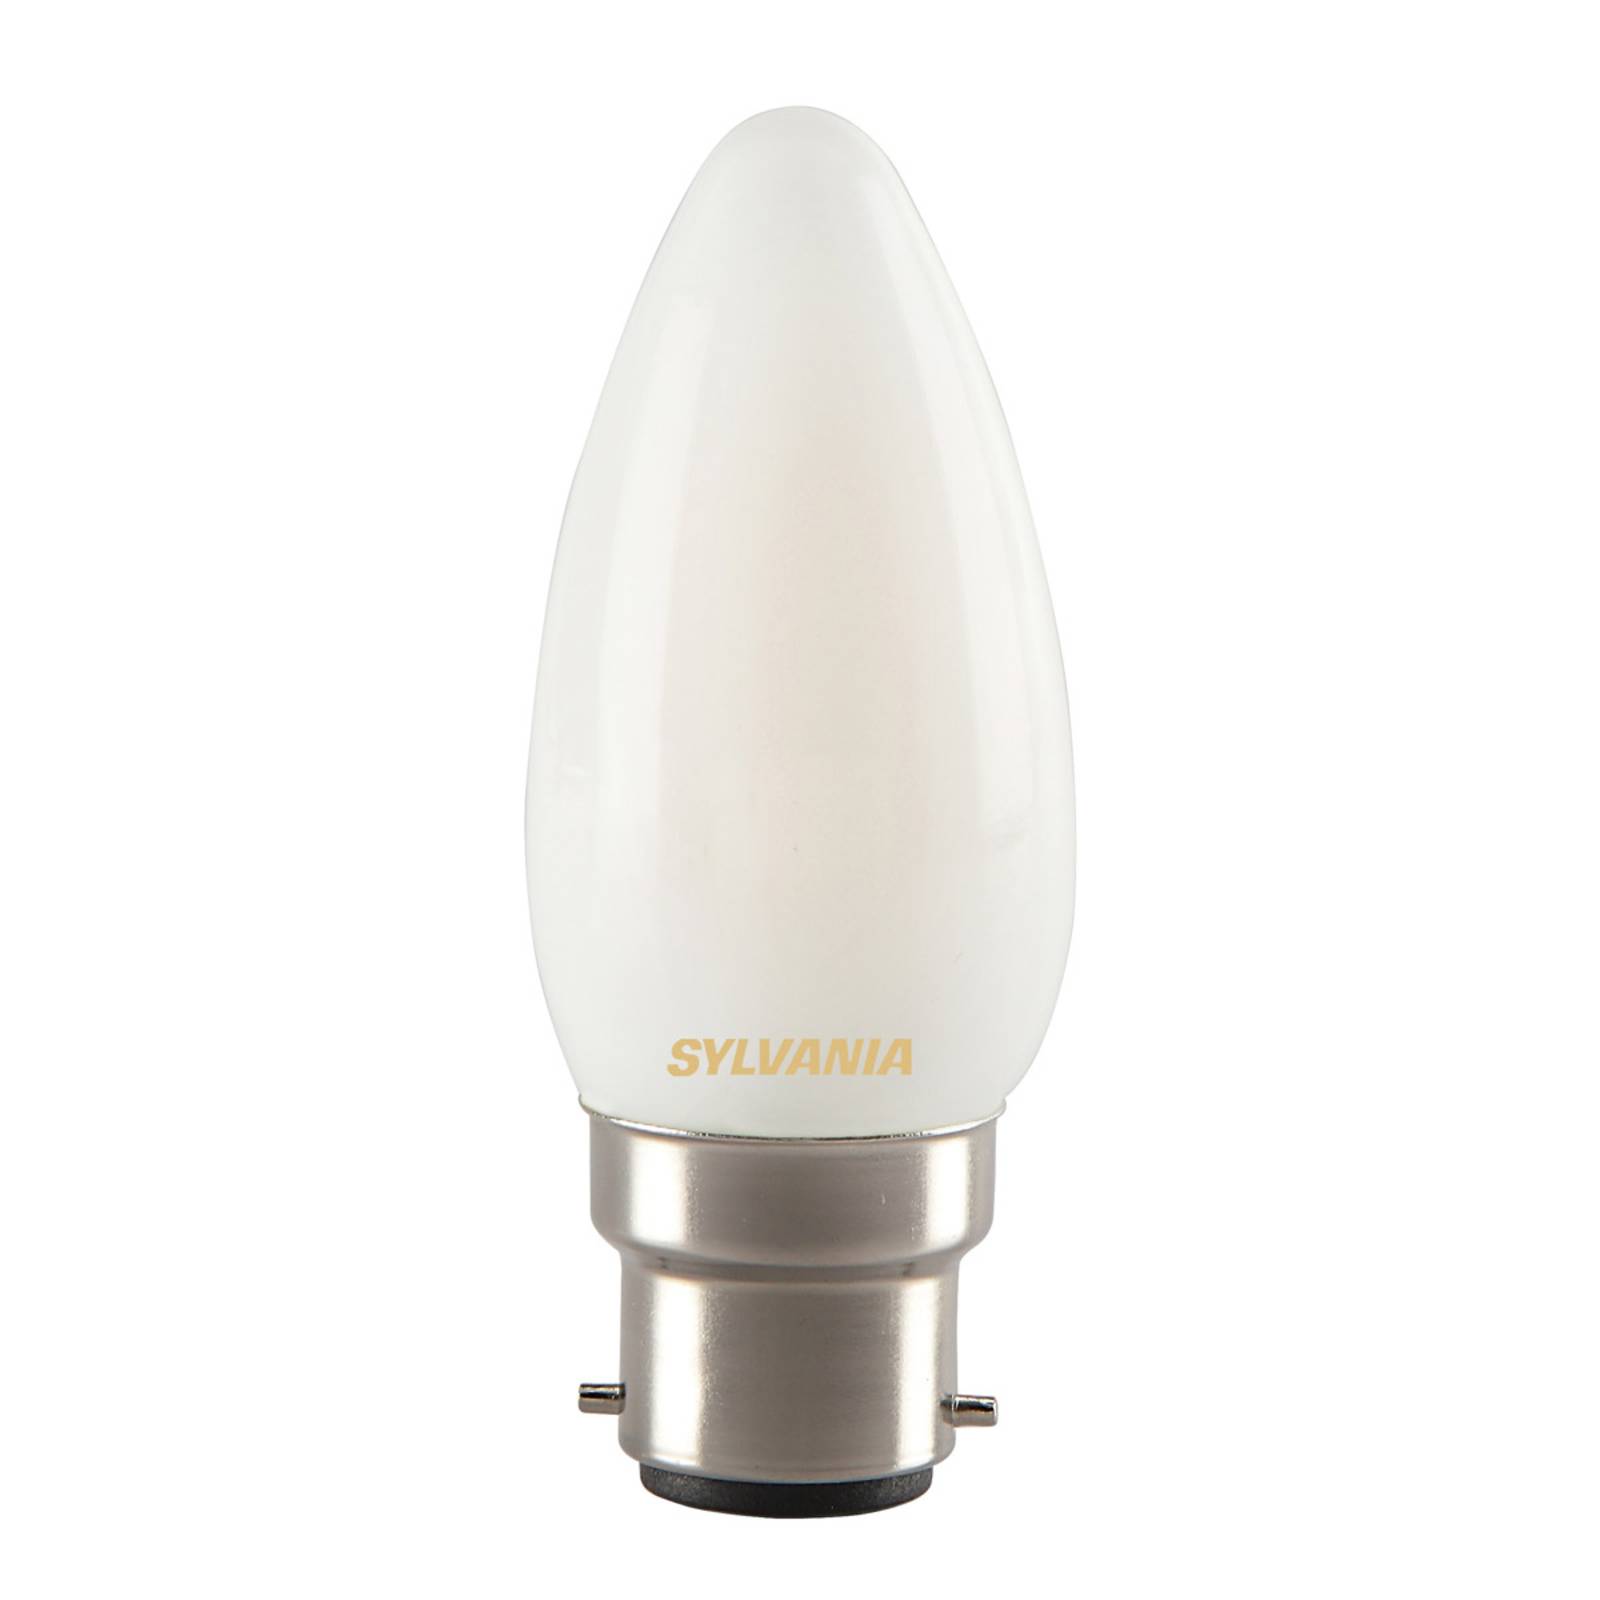 Image of Ampoule bougie LED B22 4,5 W 827 mate 5410288272856